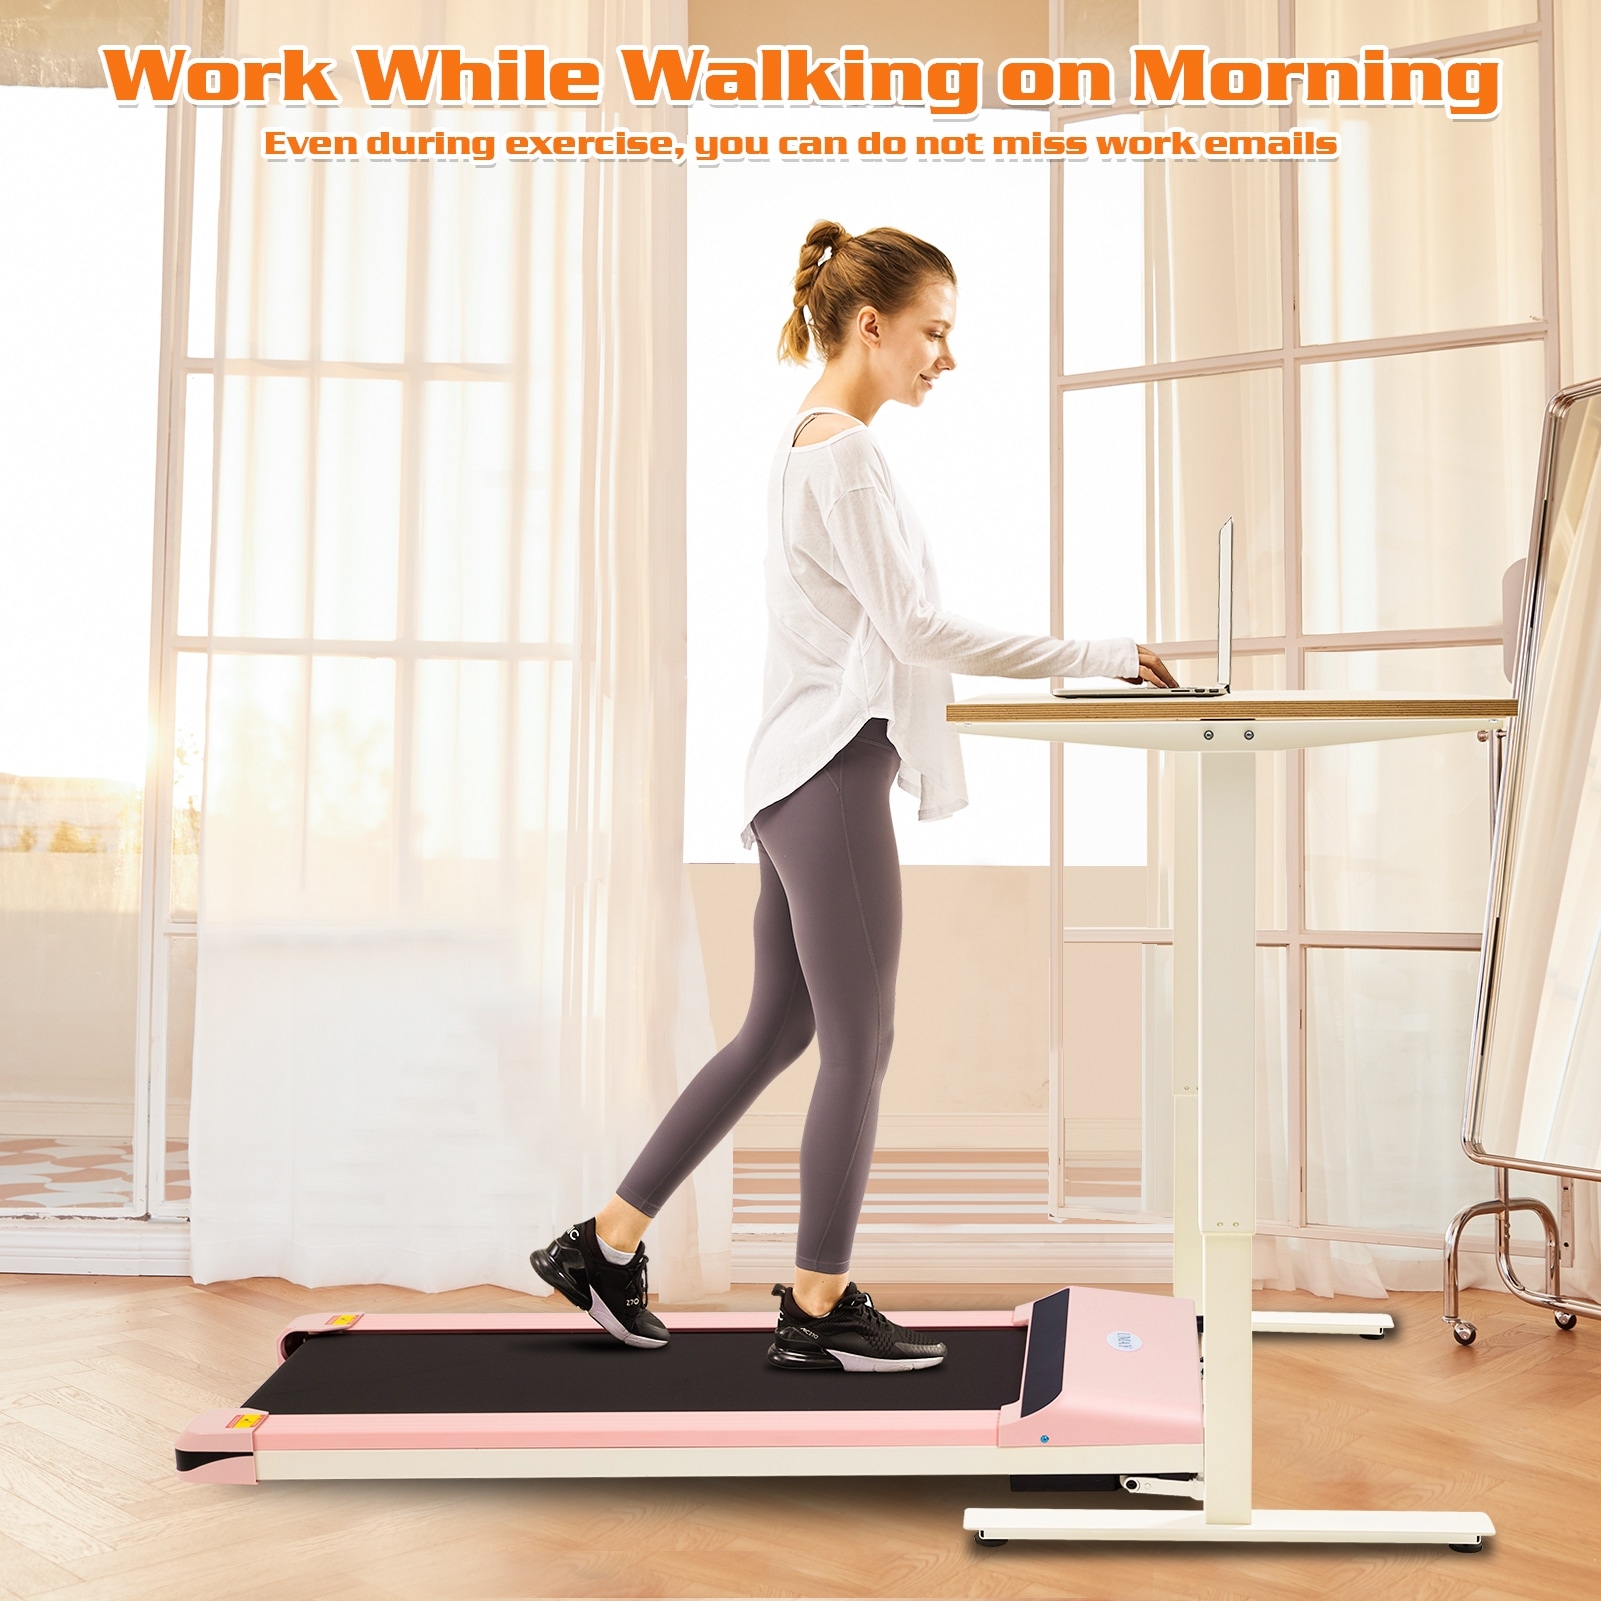 SuperFit 0.6-3.8MPH Walking Pad Under Desk Treadmill with Remote Control  and LED Display Pink 